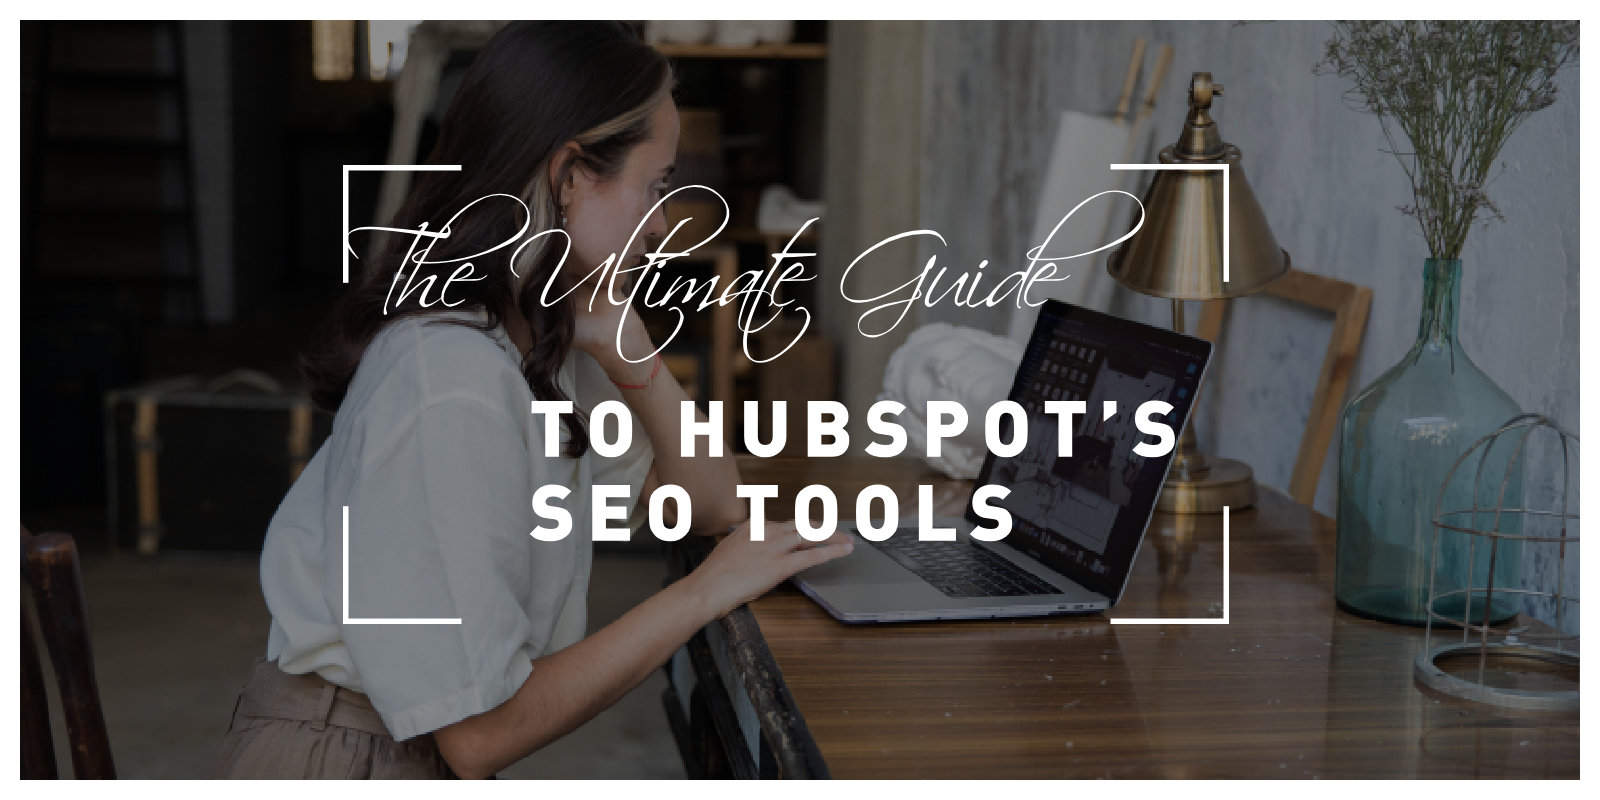 the ultimate guide to hubspot’s seo tools